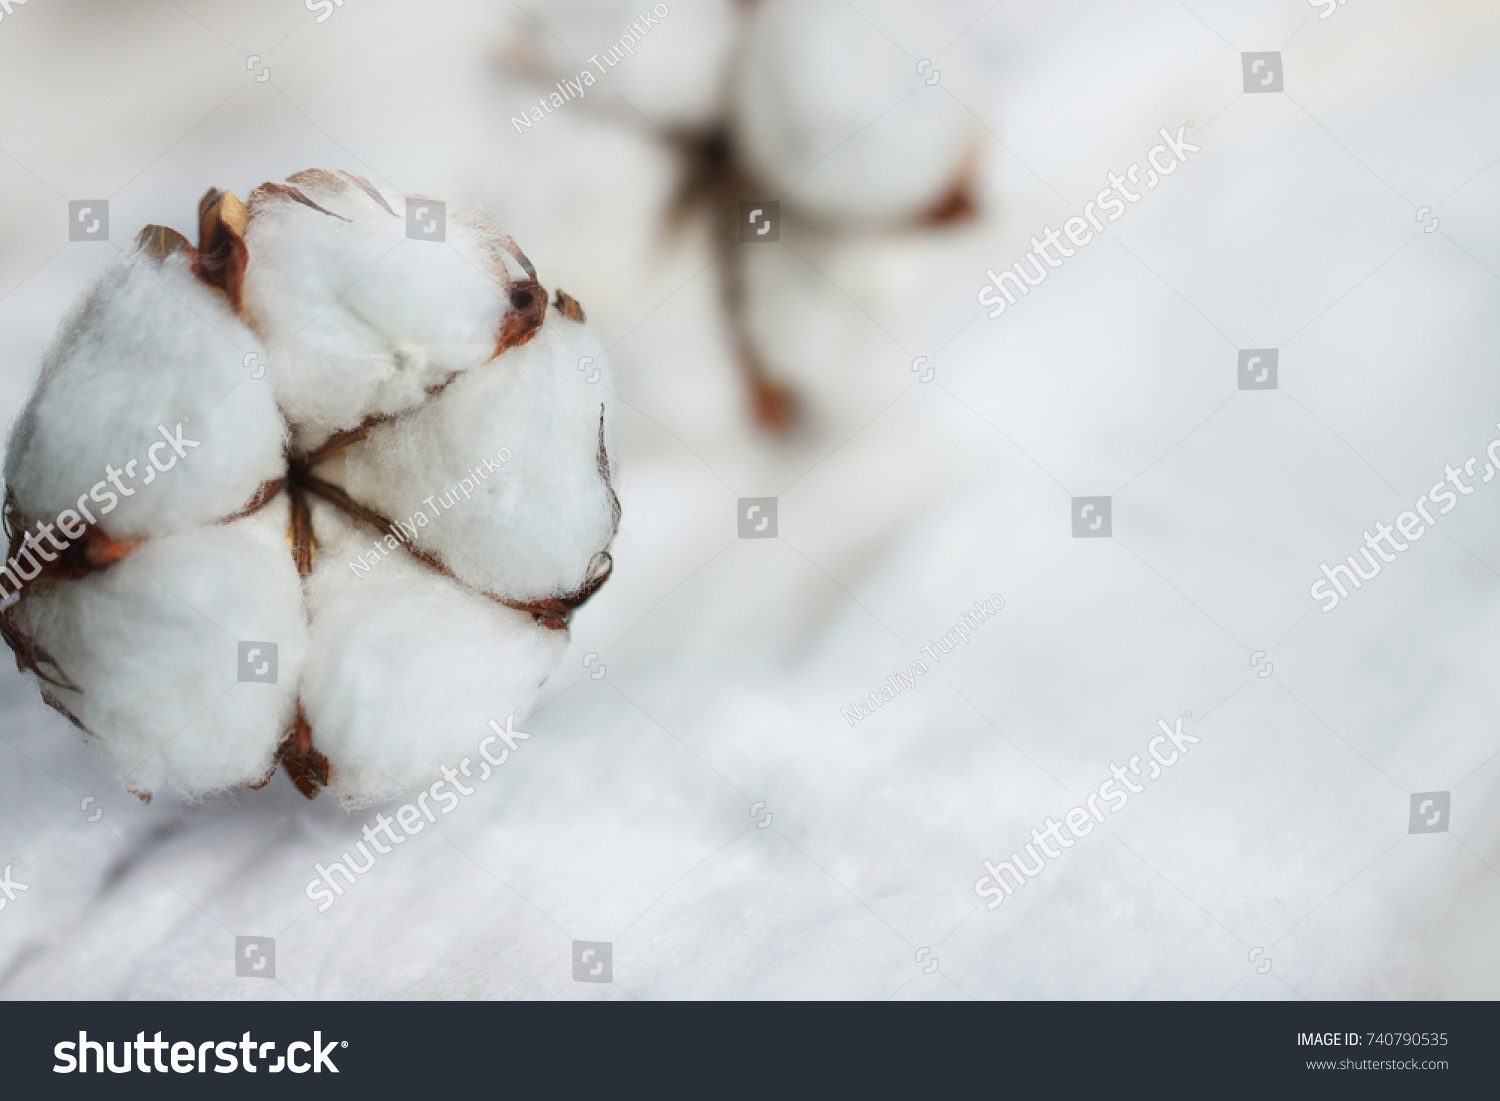 Delicate white flowers of cotton on a wooden Board. Beautiful natural background. #740790535